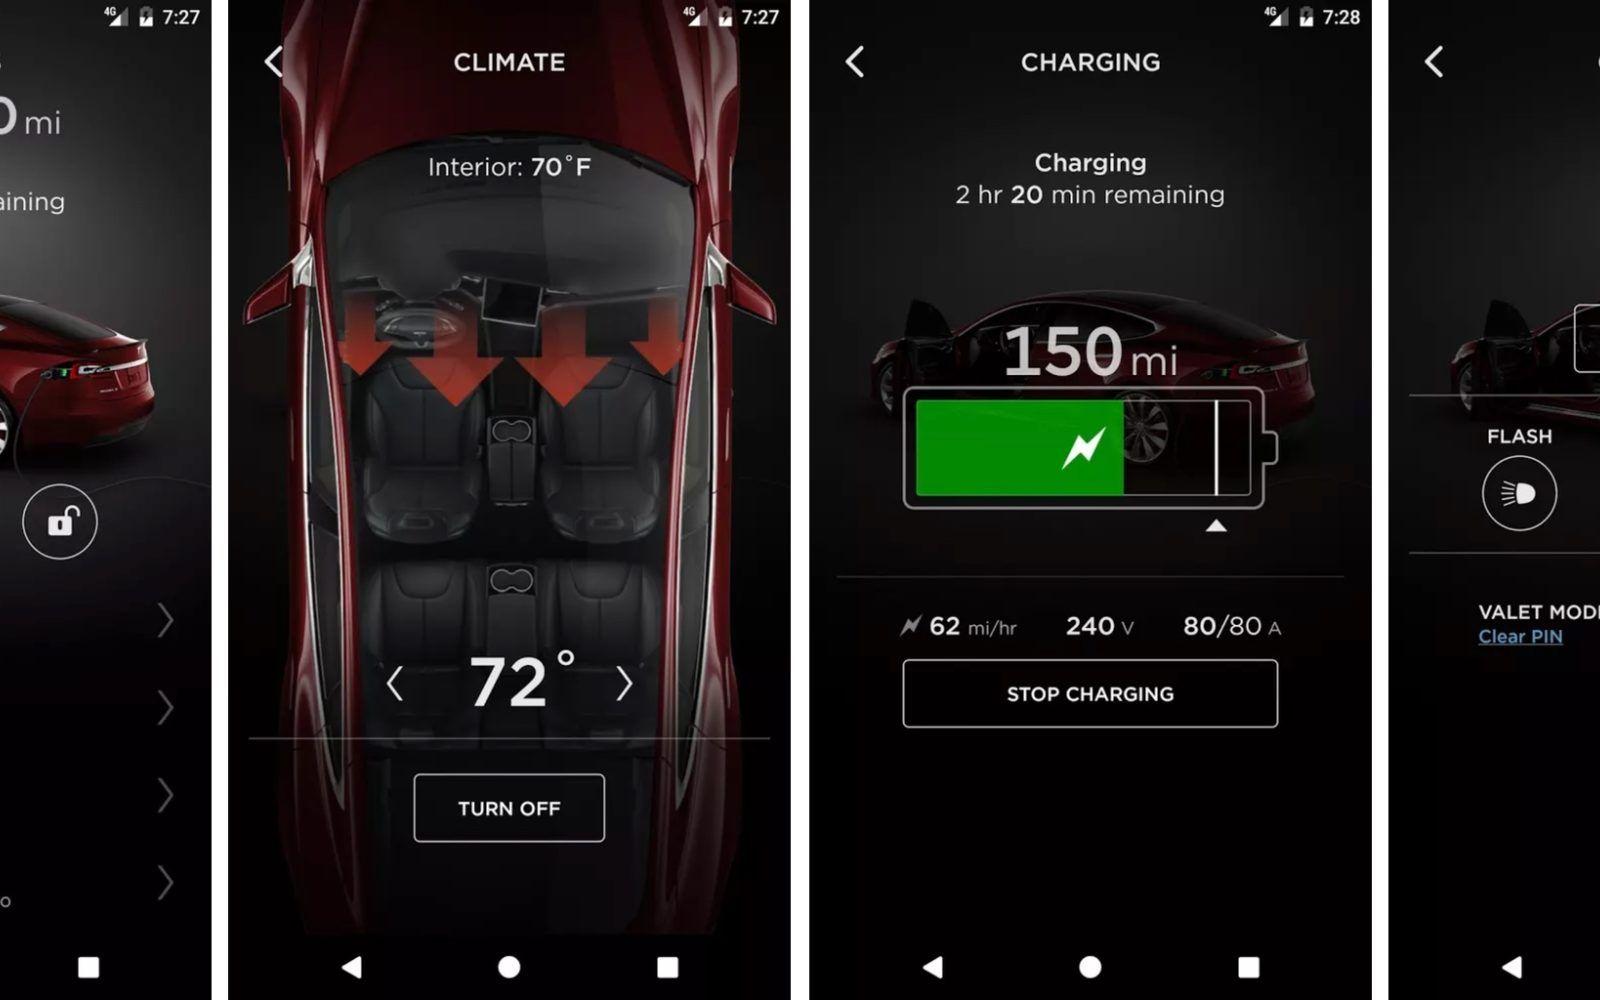 Tesla App Logo - First look with picture at Tesla's new mobile app with new UI